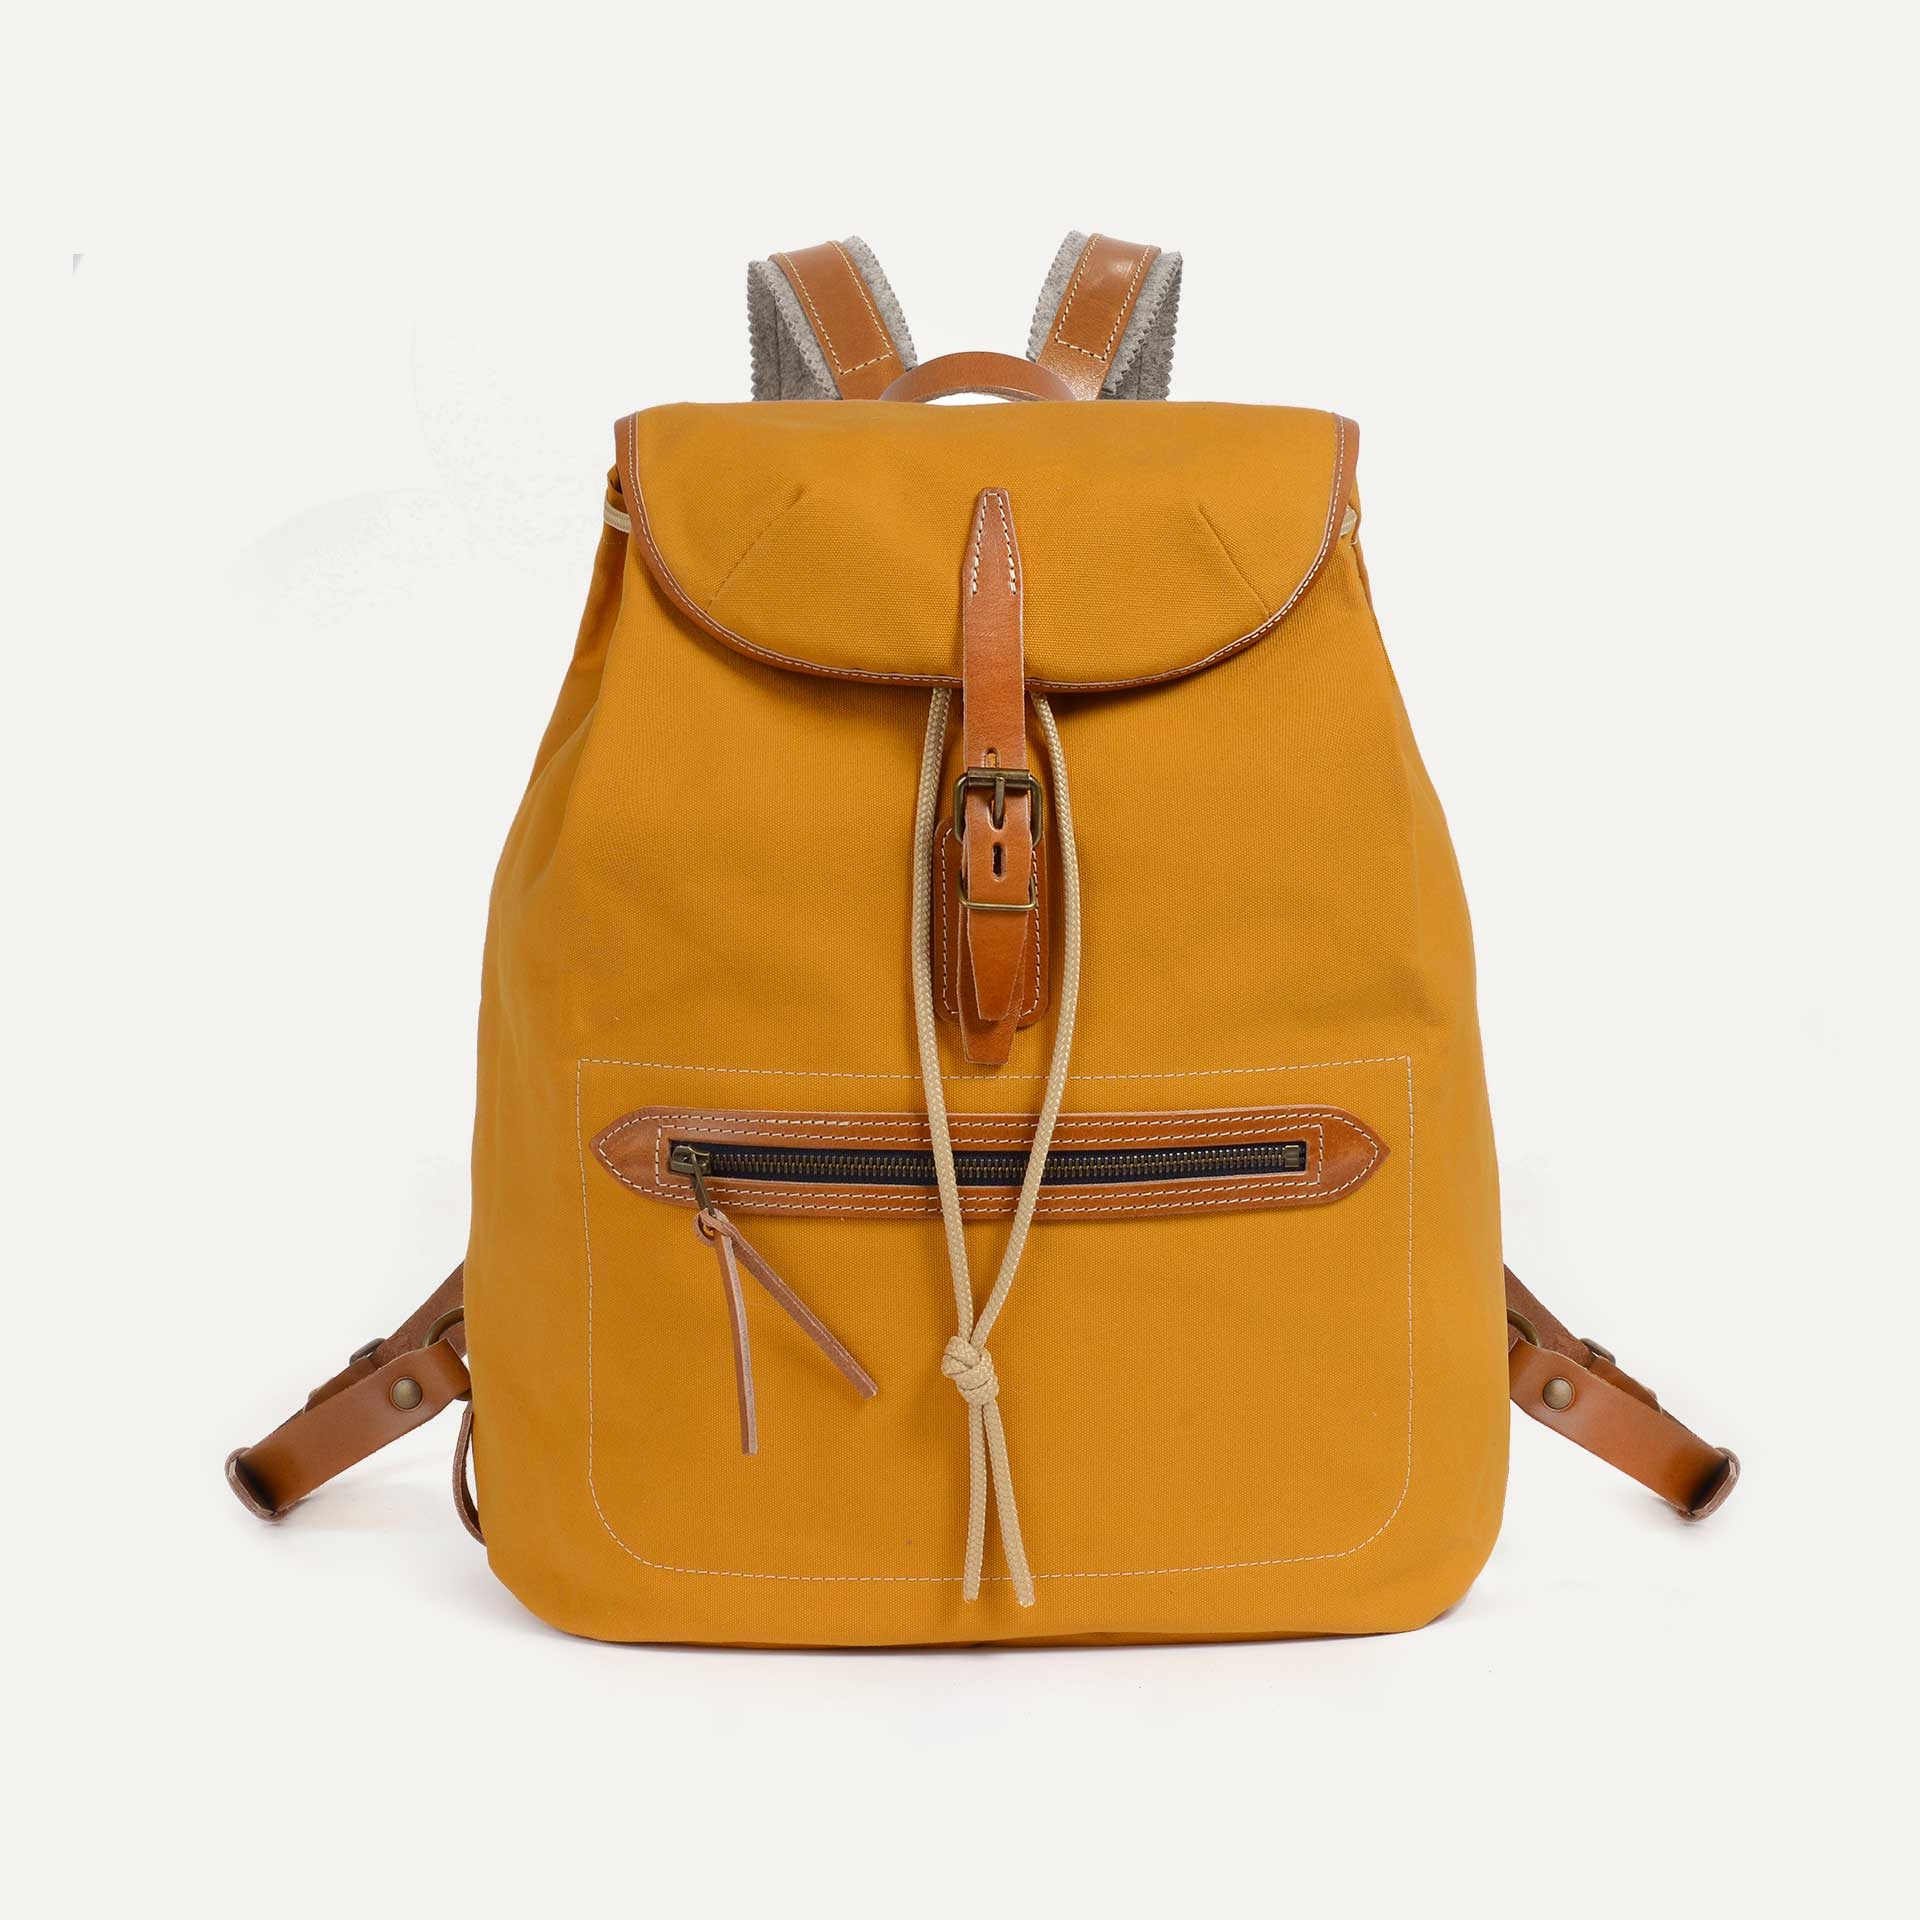 Camp backpack - Yellow ochre (image n°1)